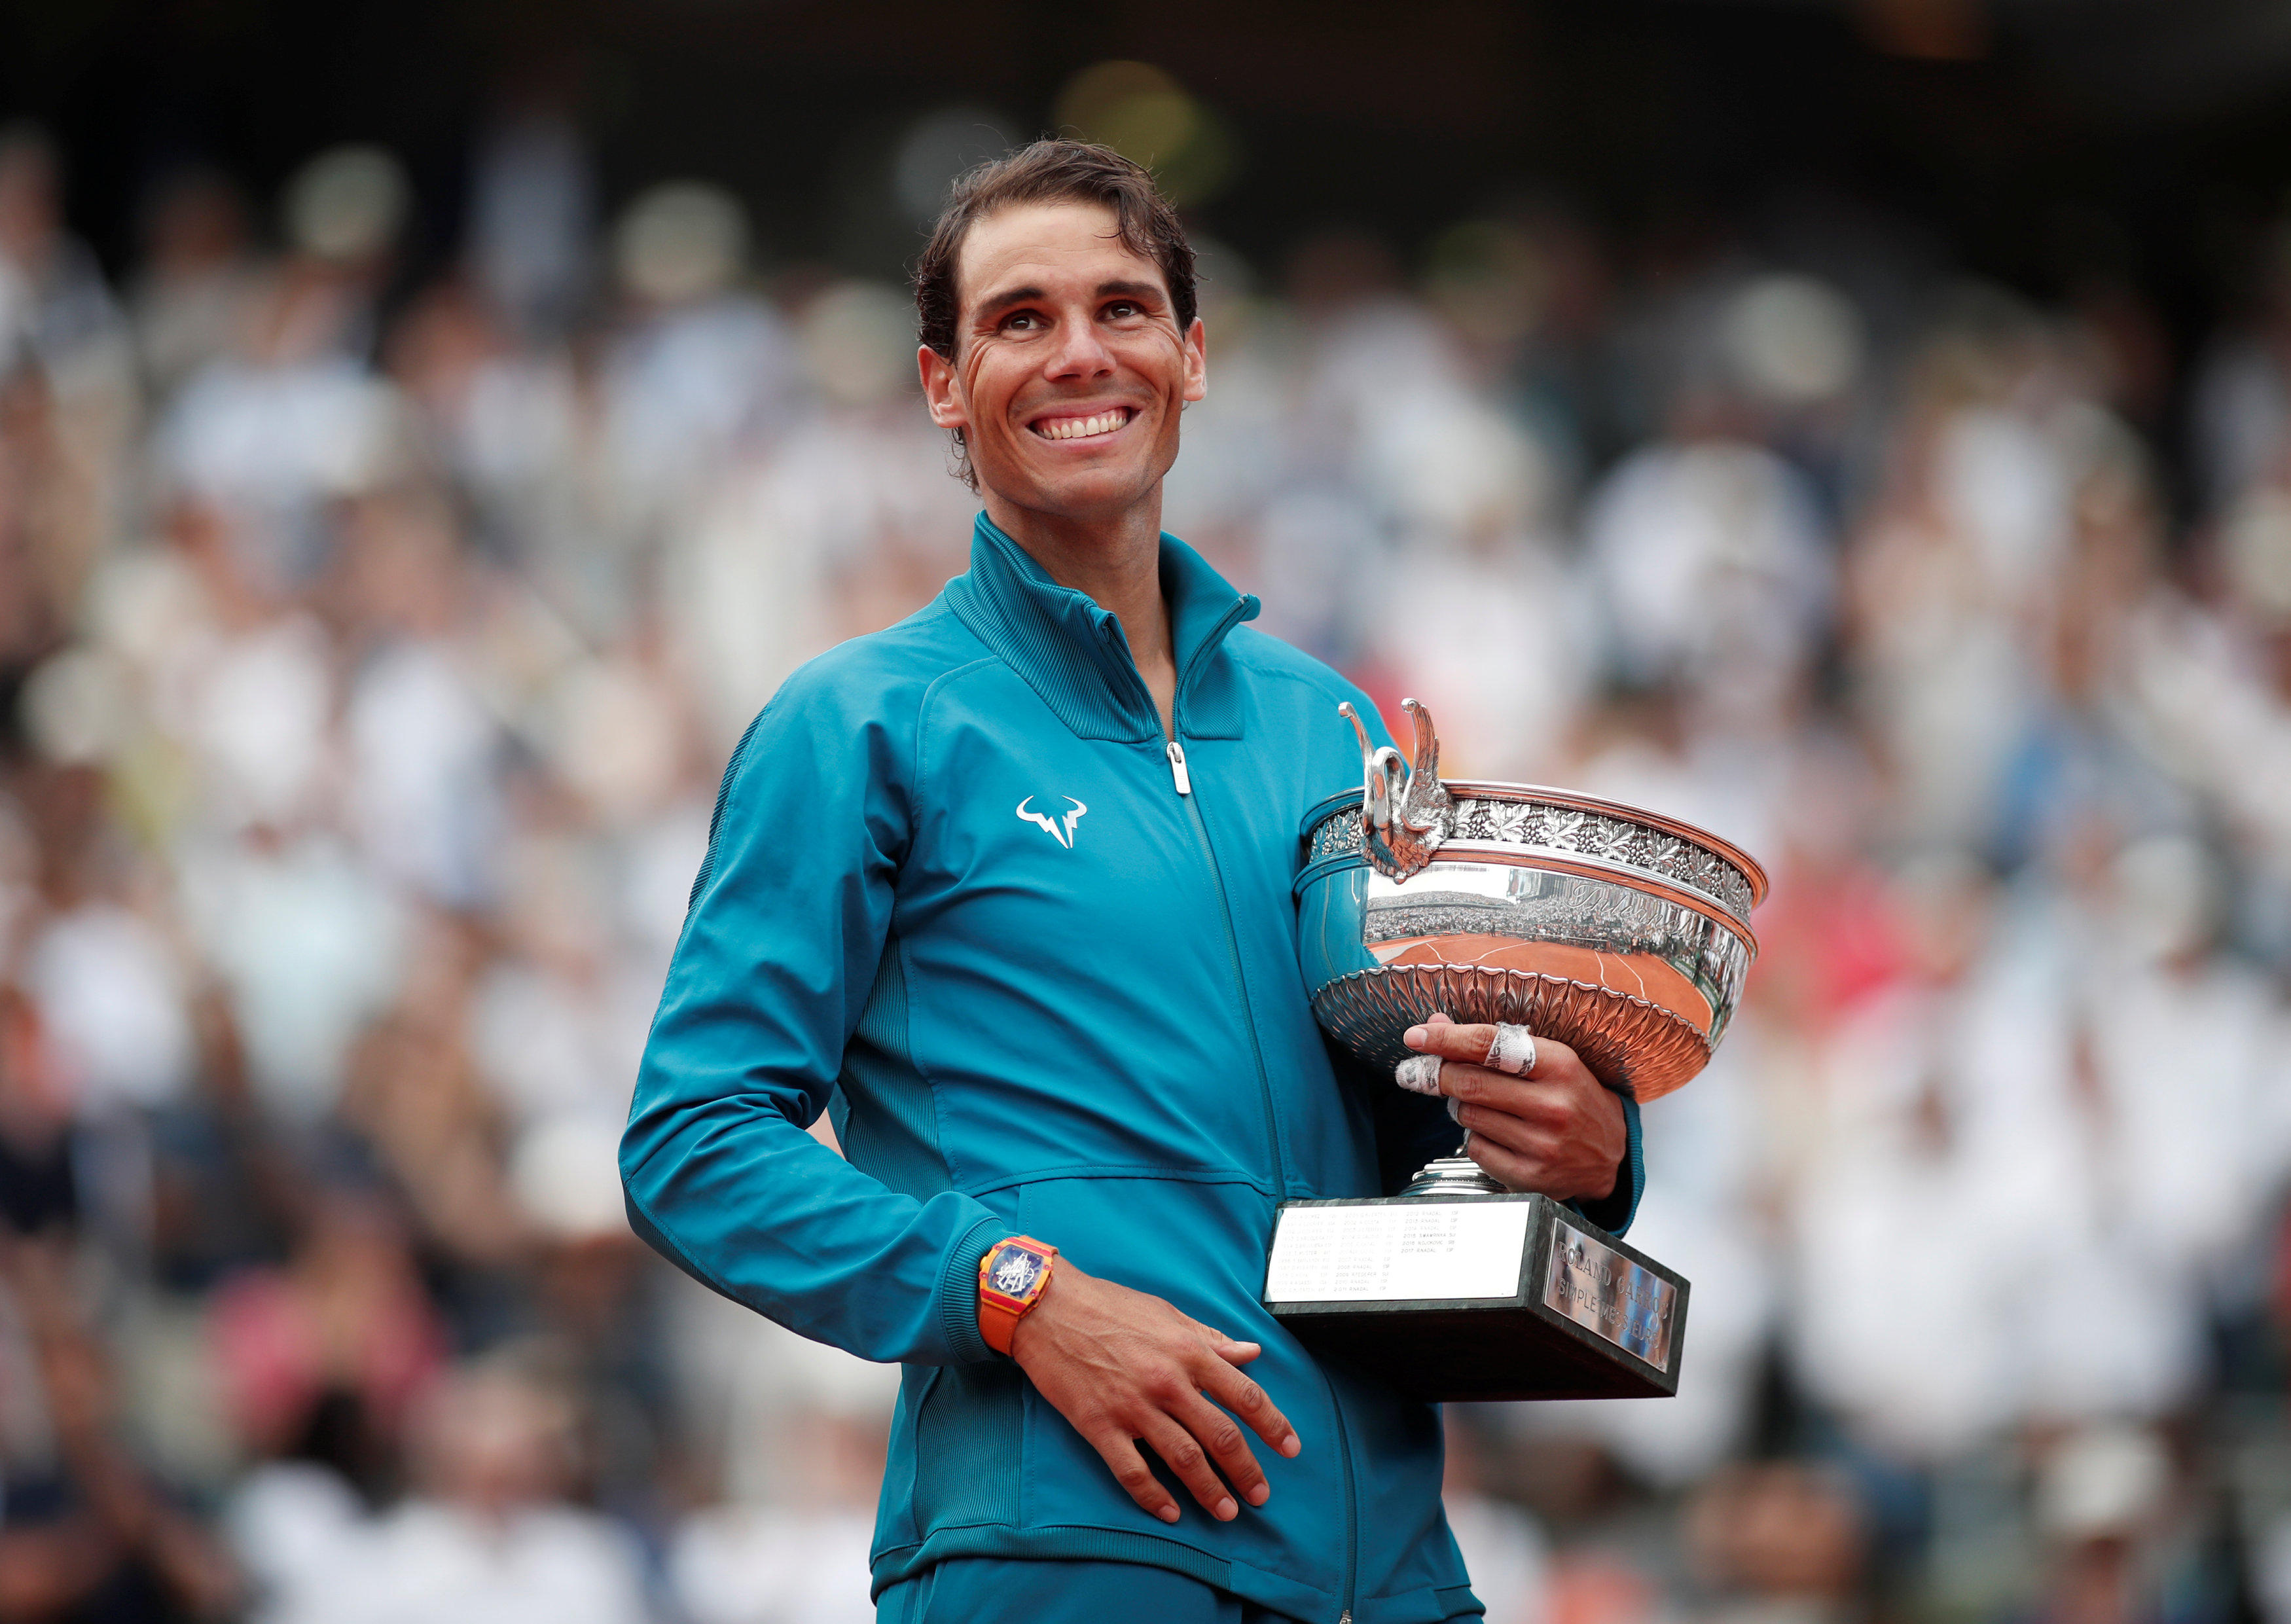 Rafael Nadal wins 11th French Open title, beating Dominic Thiem in 3